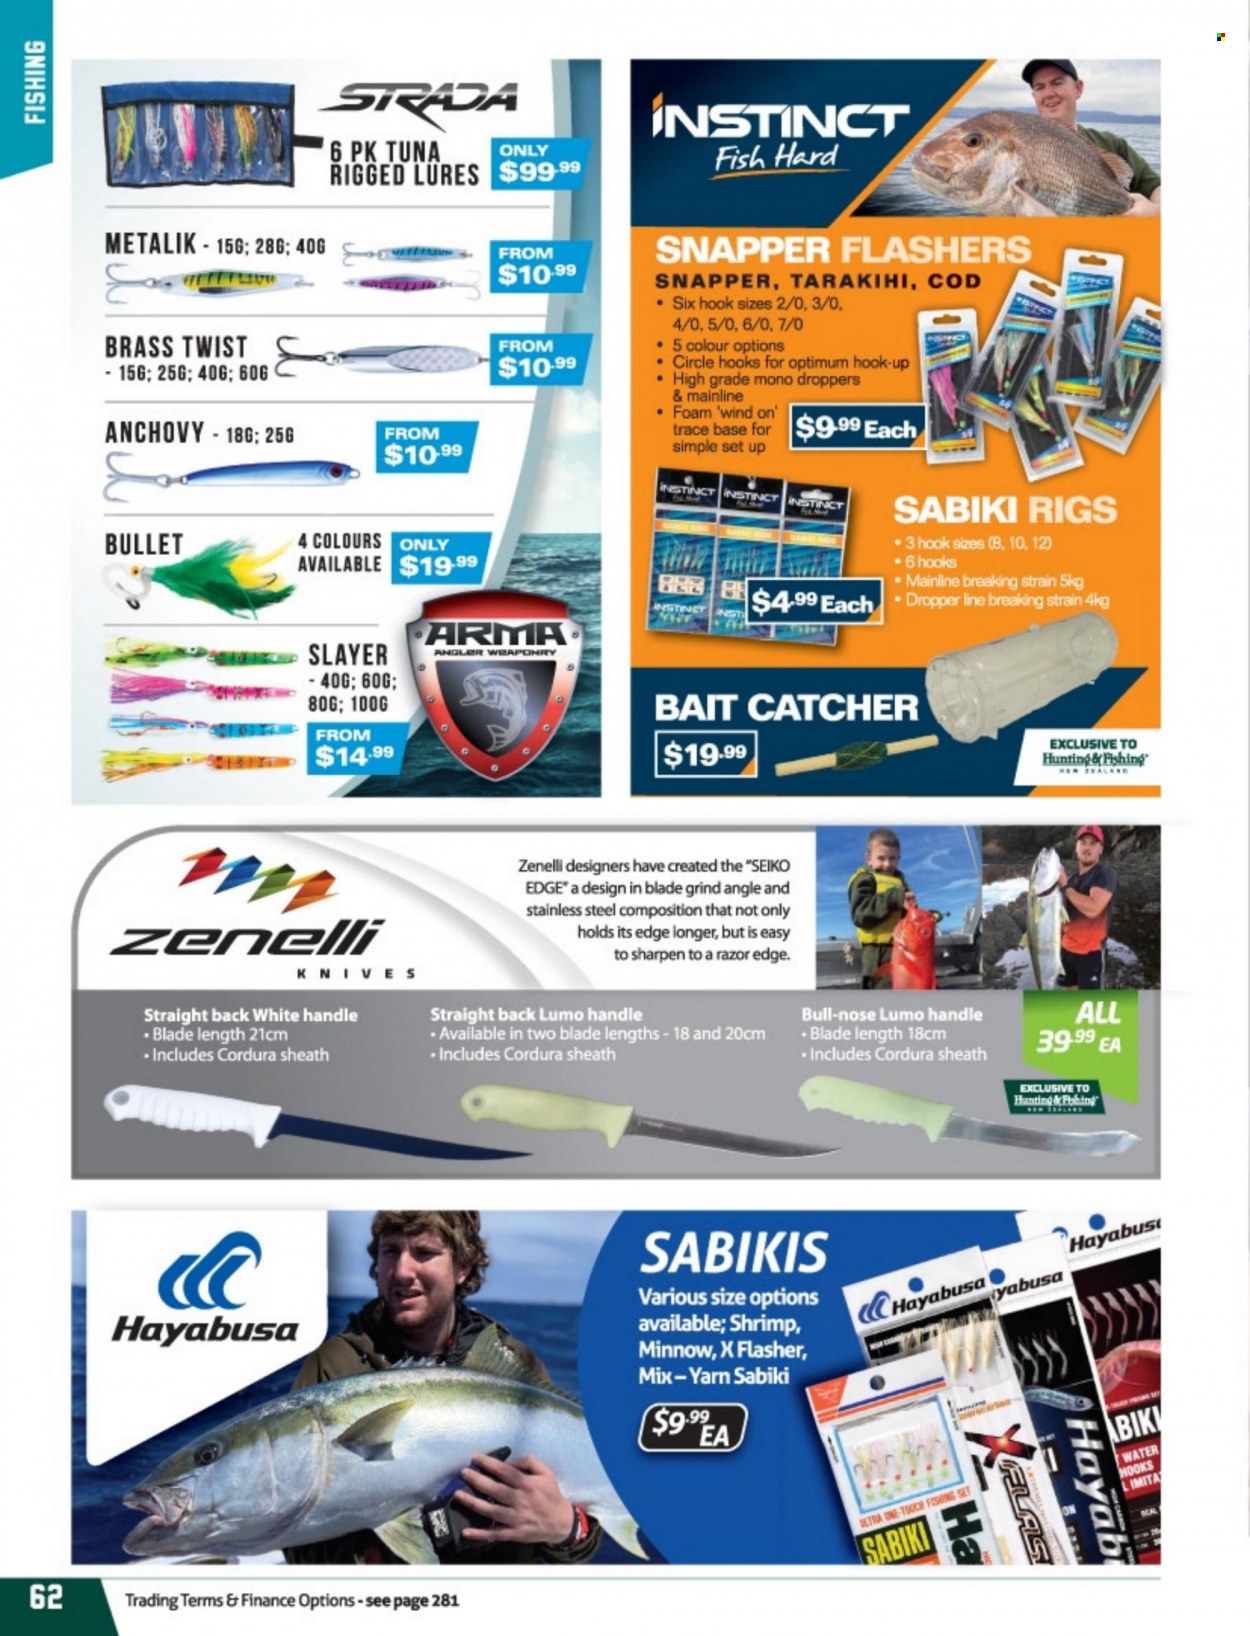 thumbnail - Hunting & Fishing mailer - Sales products - knife. Page 62.